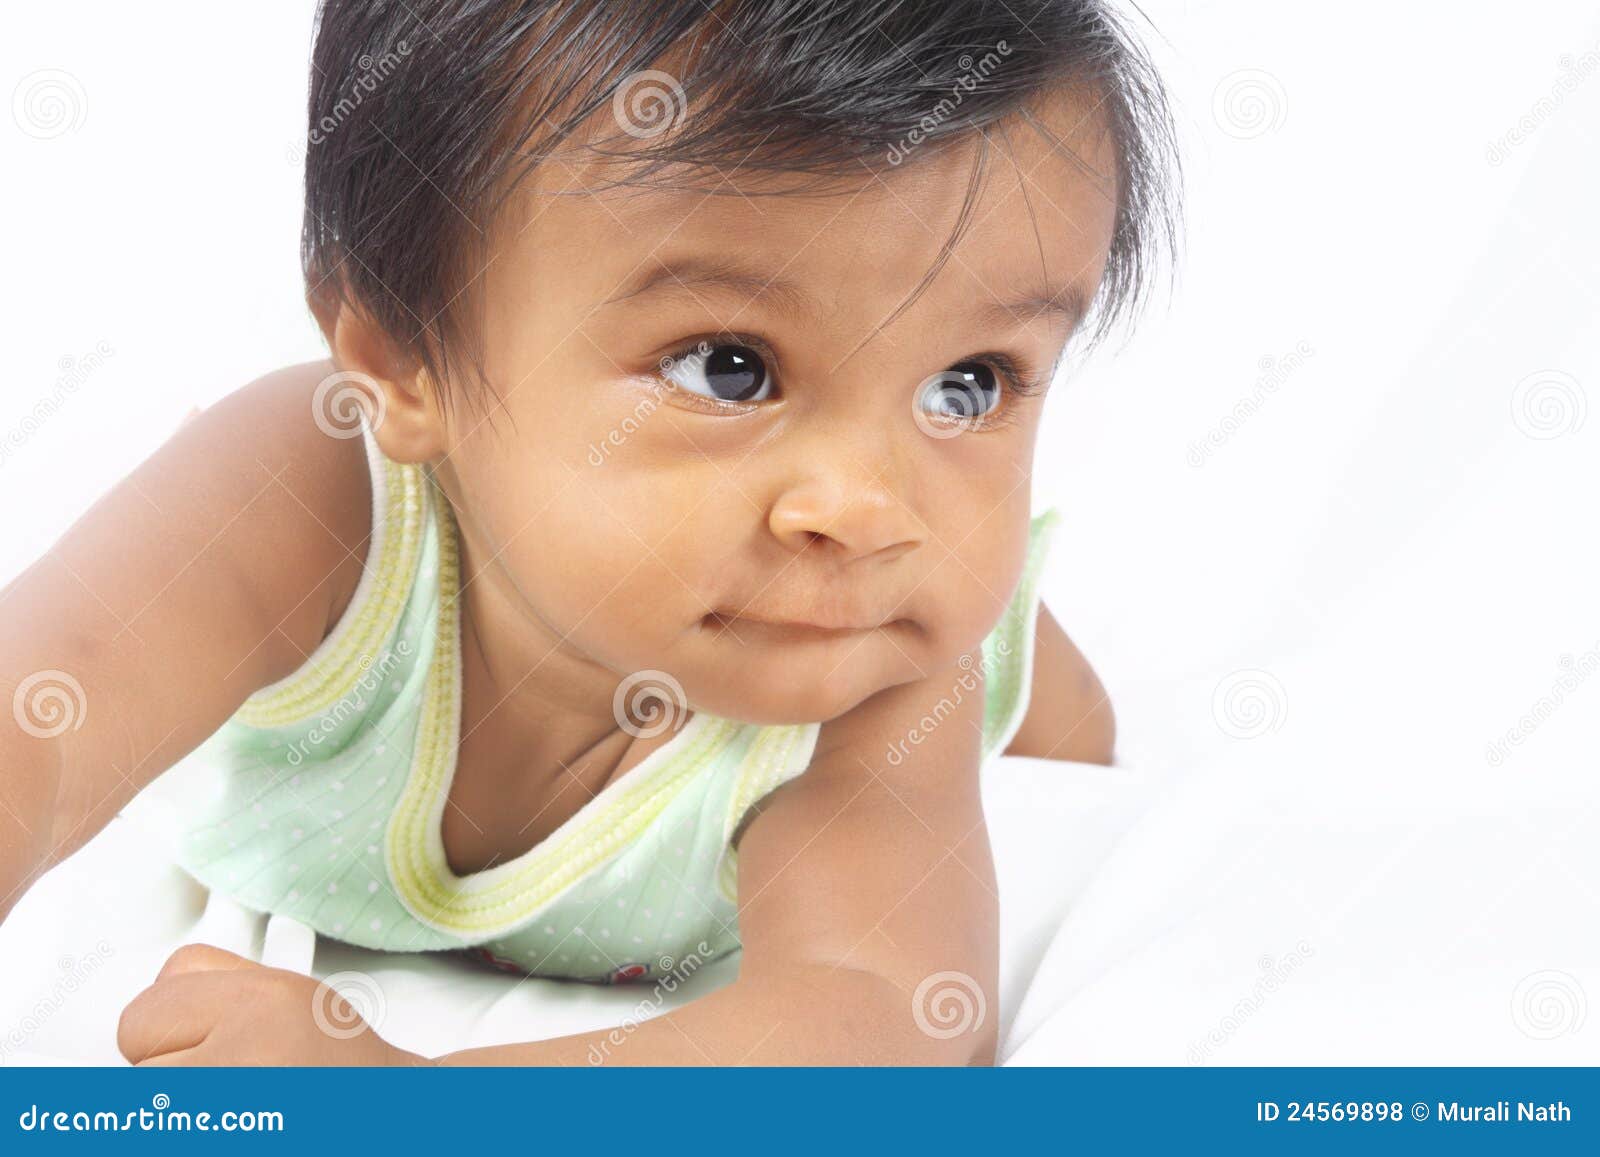 Indian Cute Baby Lying On Bed Stock Photo - Image of ...